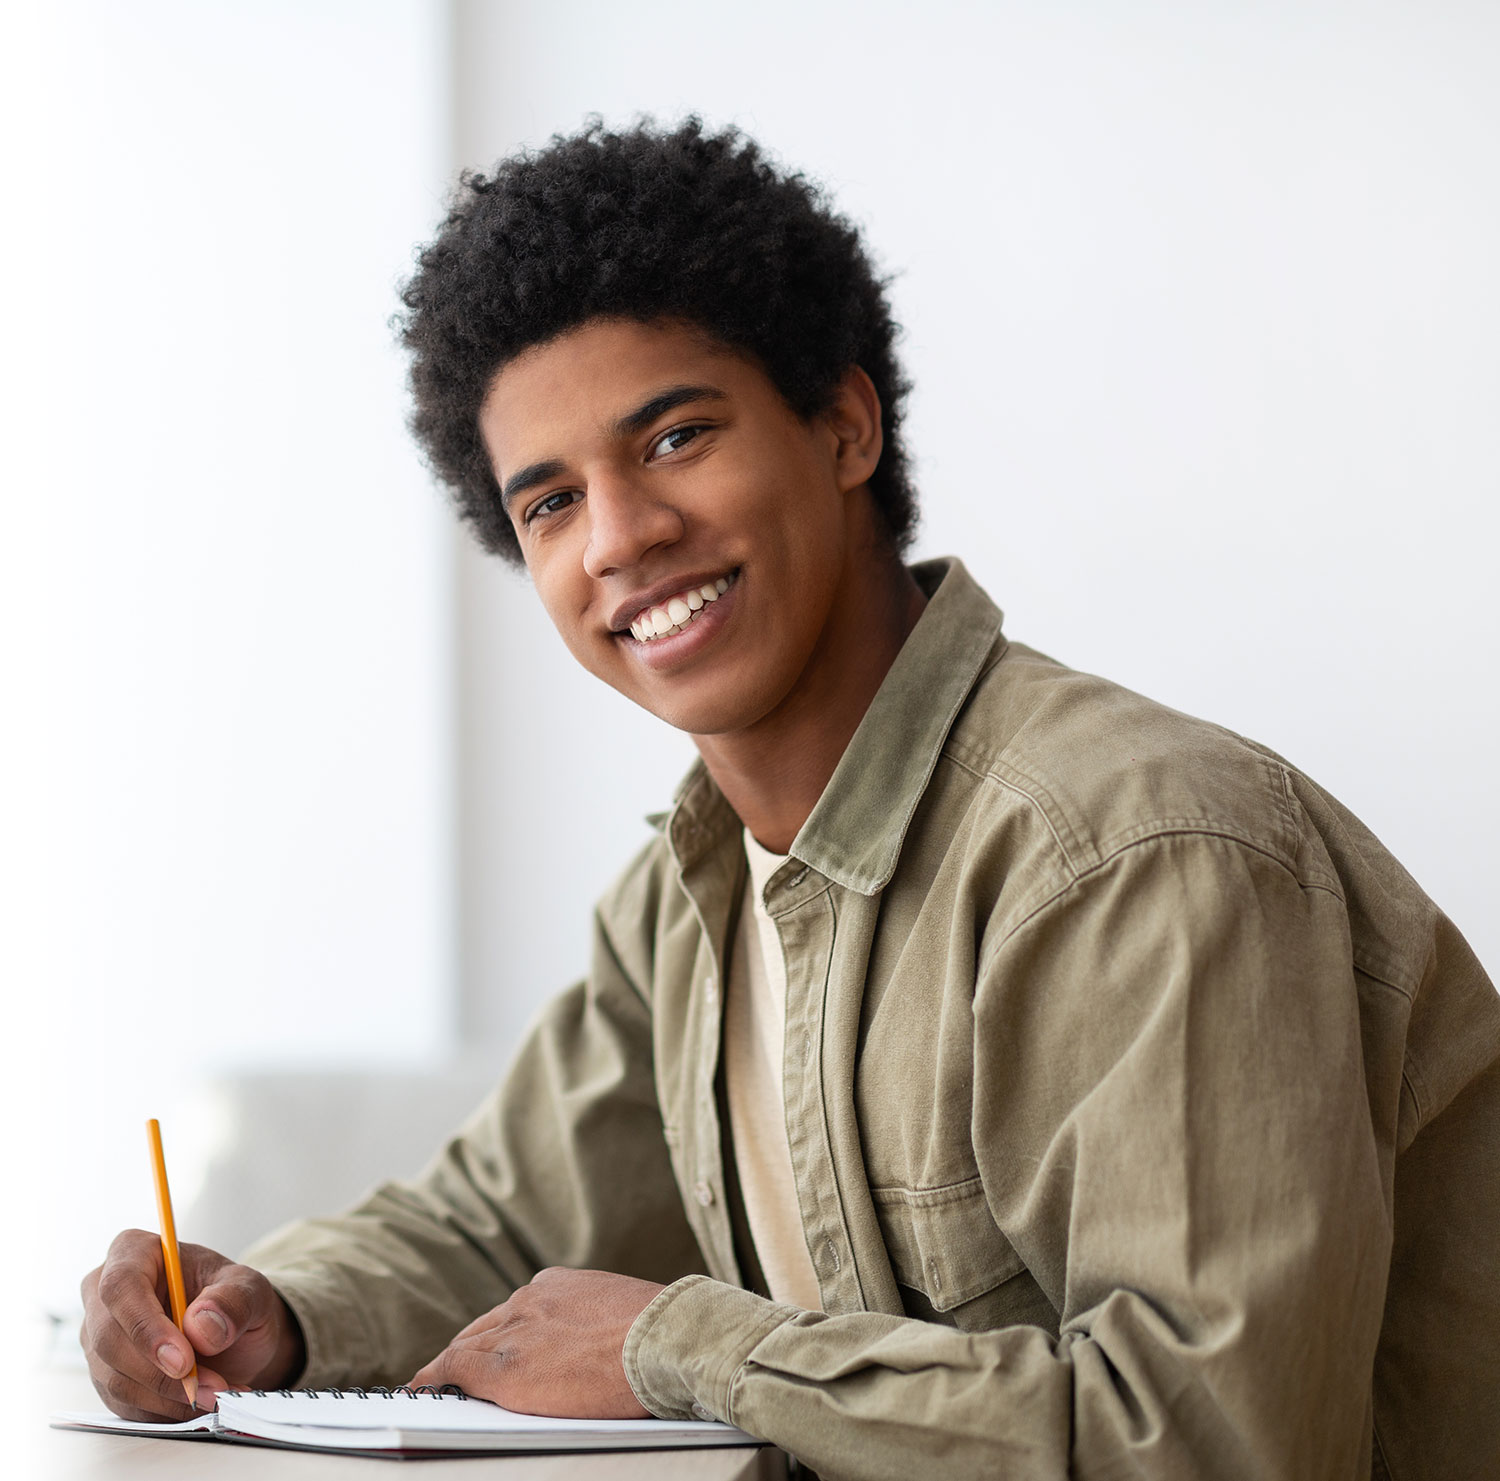 African American UK Student holding a pencil and writing while looking at the viewer.